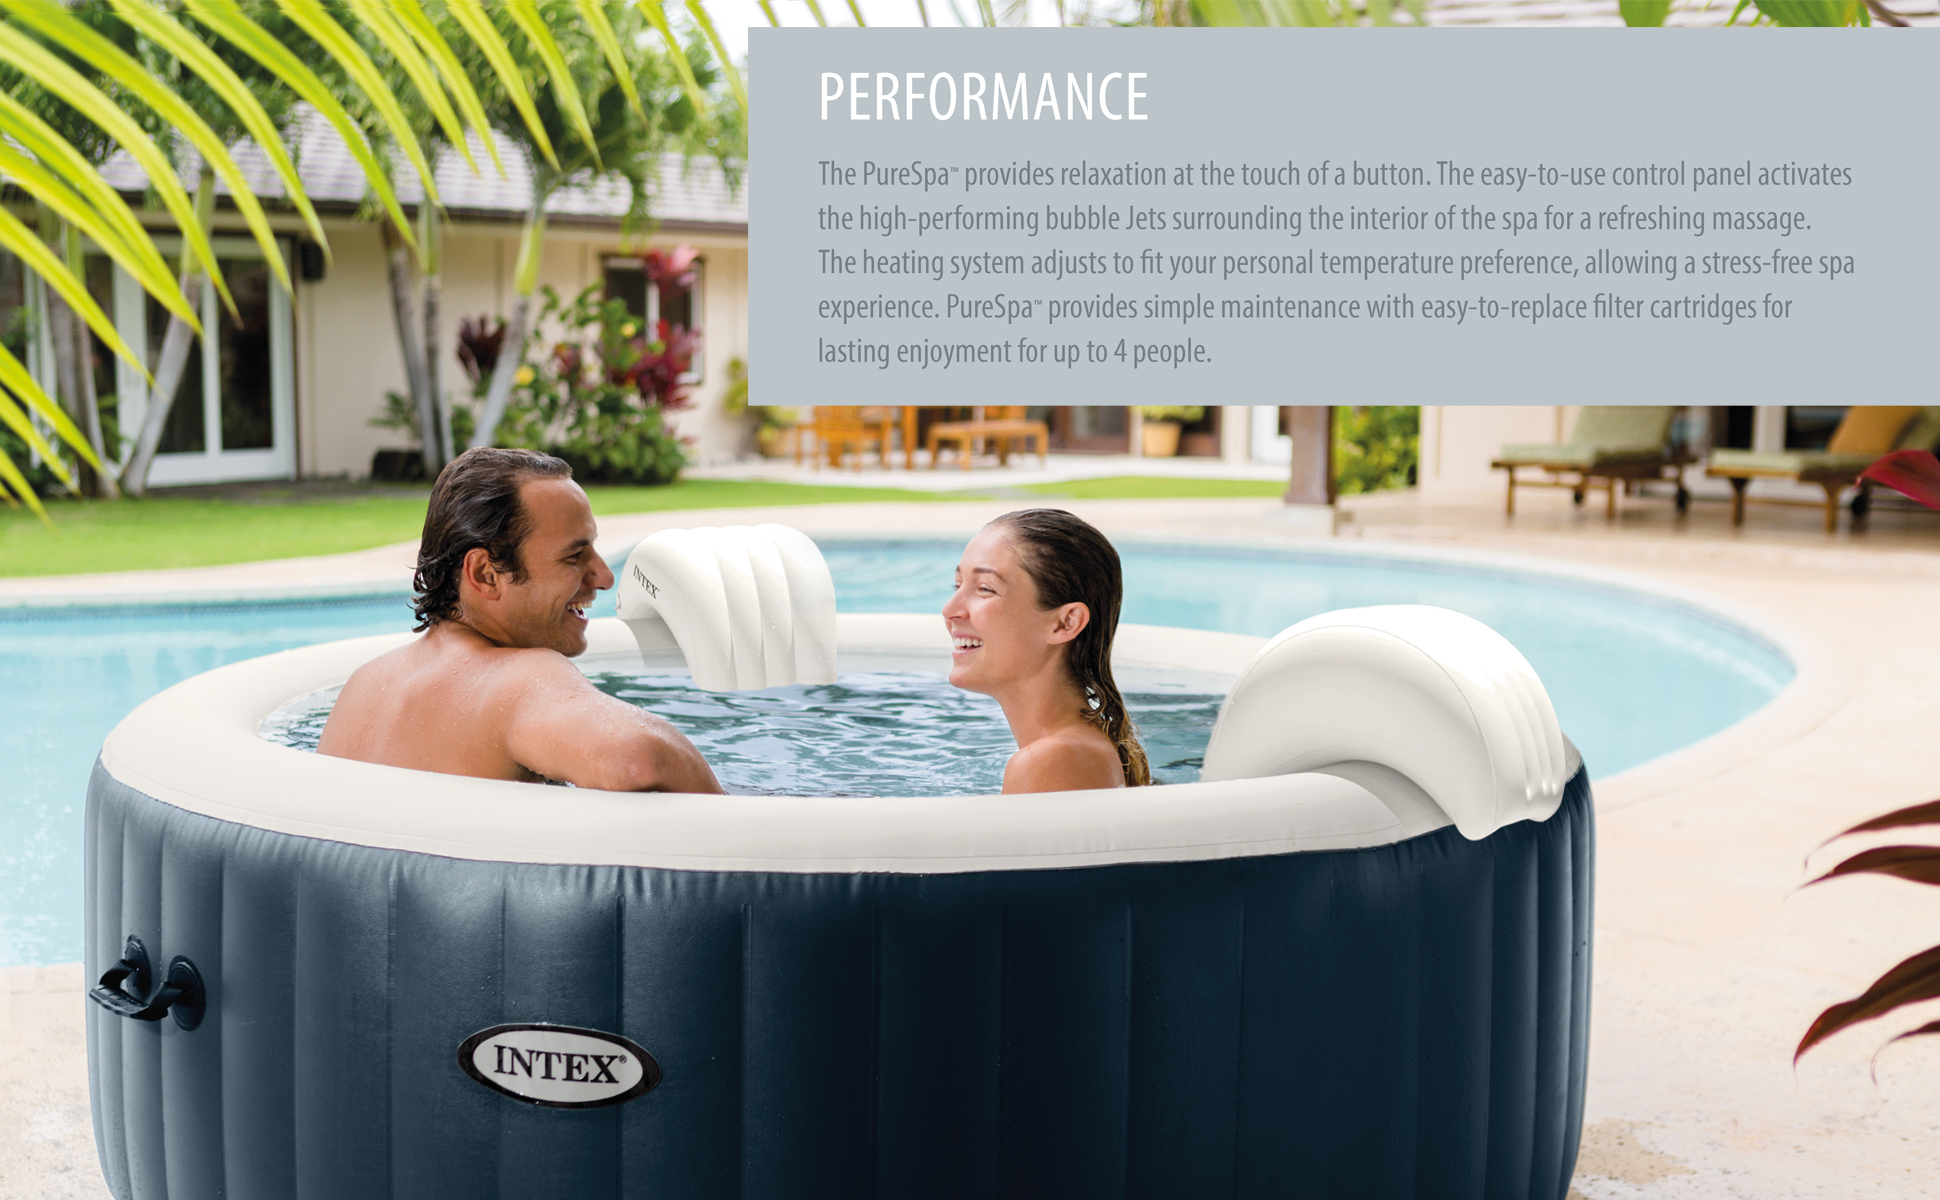 Intex PureSpa Plus 6 Person Inflatable Hot Tub Bubble Jet Spa w/ 2 Seats, Navy - image 3 of 12